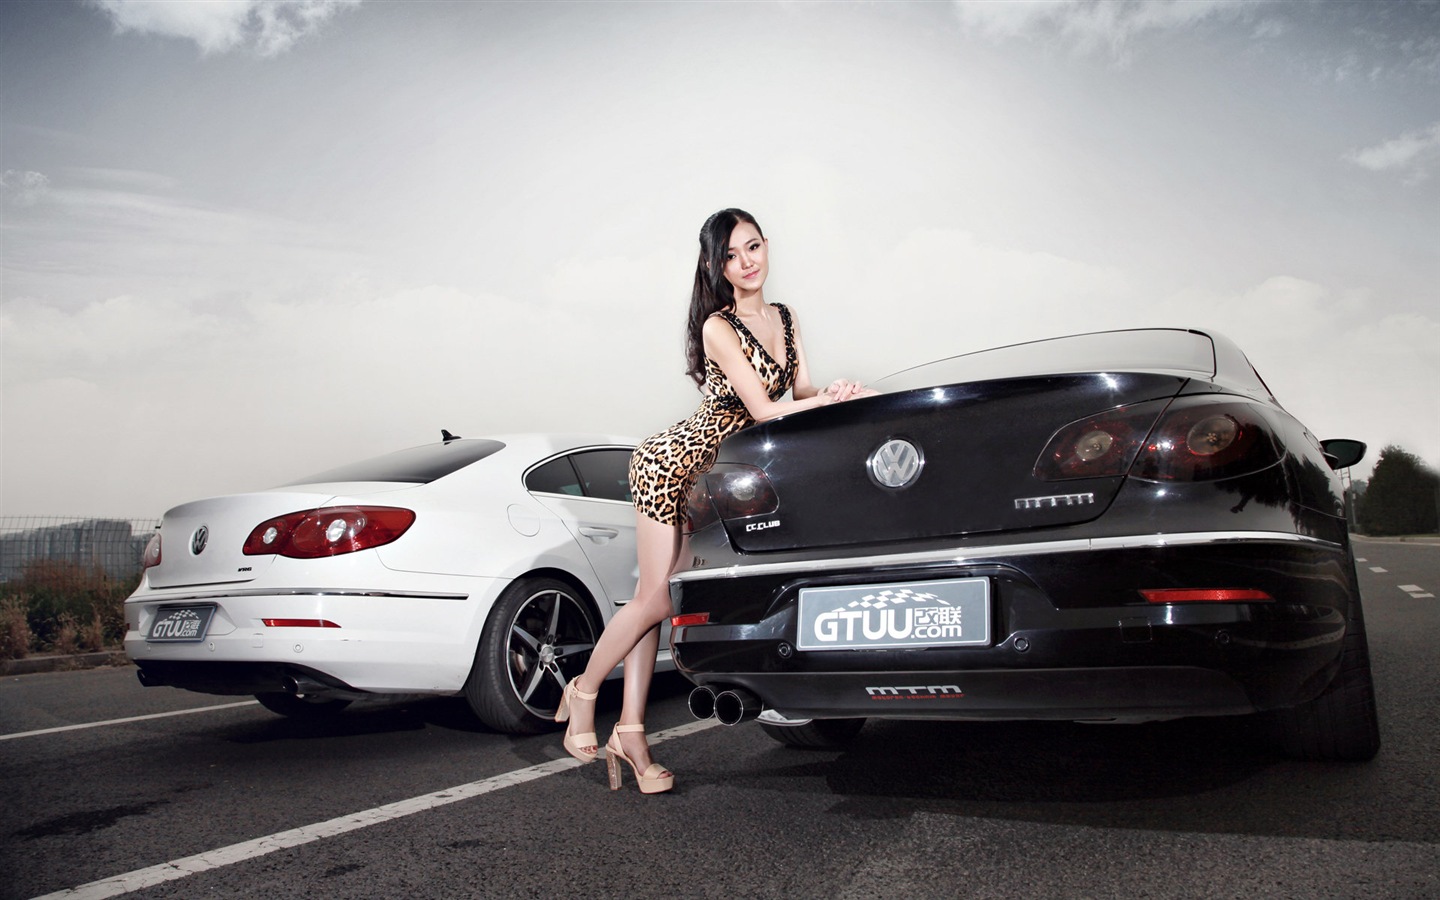 Beautiful leopard dress girl with Volkswagen sports car wallpapers #7 - 1440x900